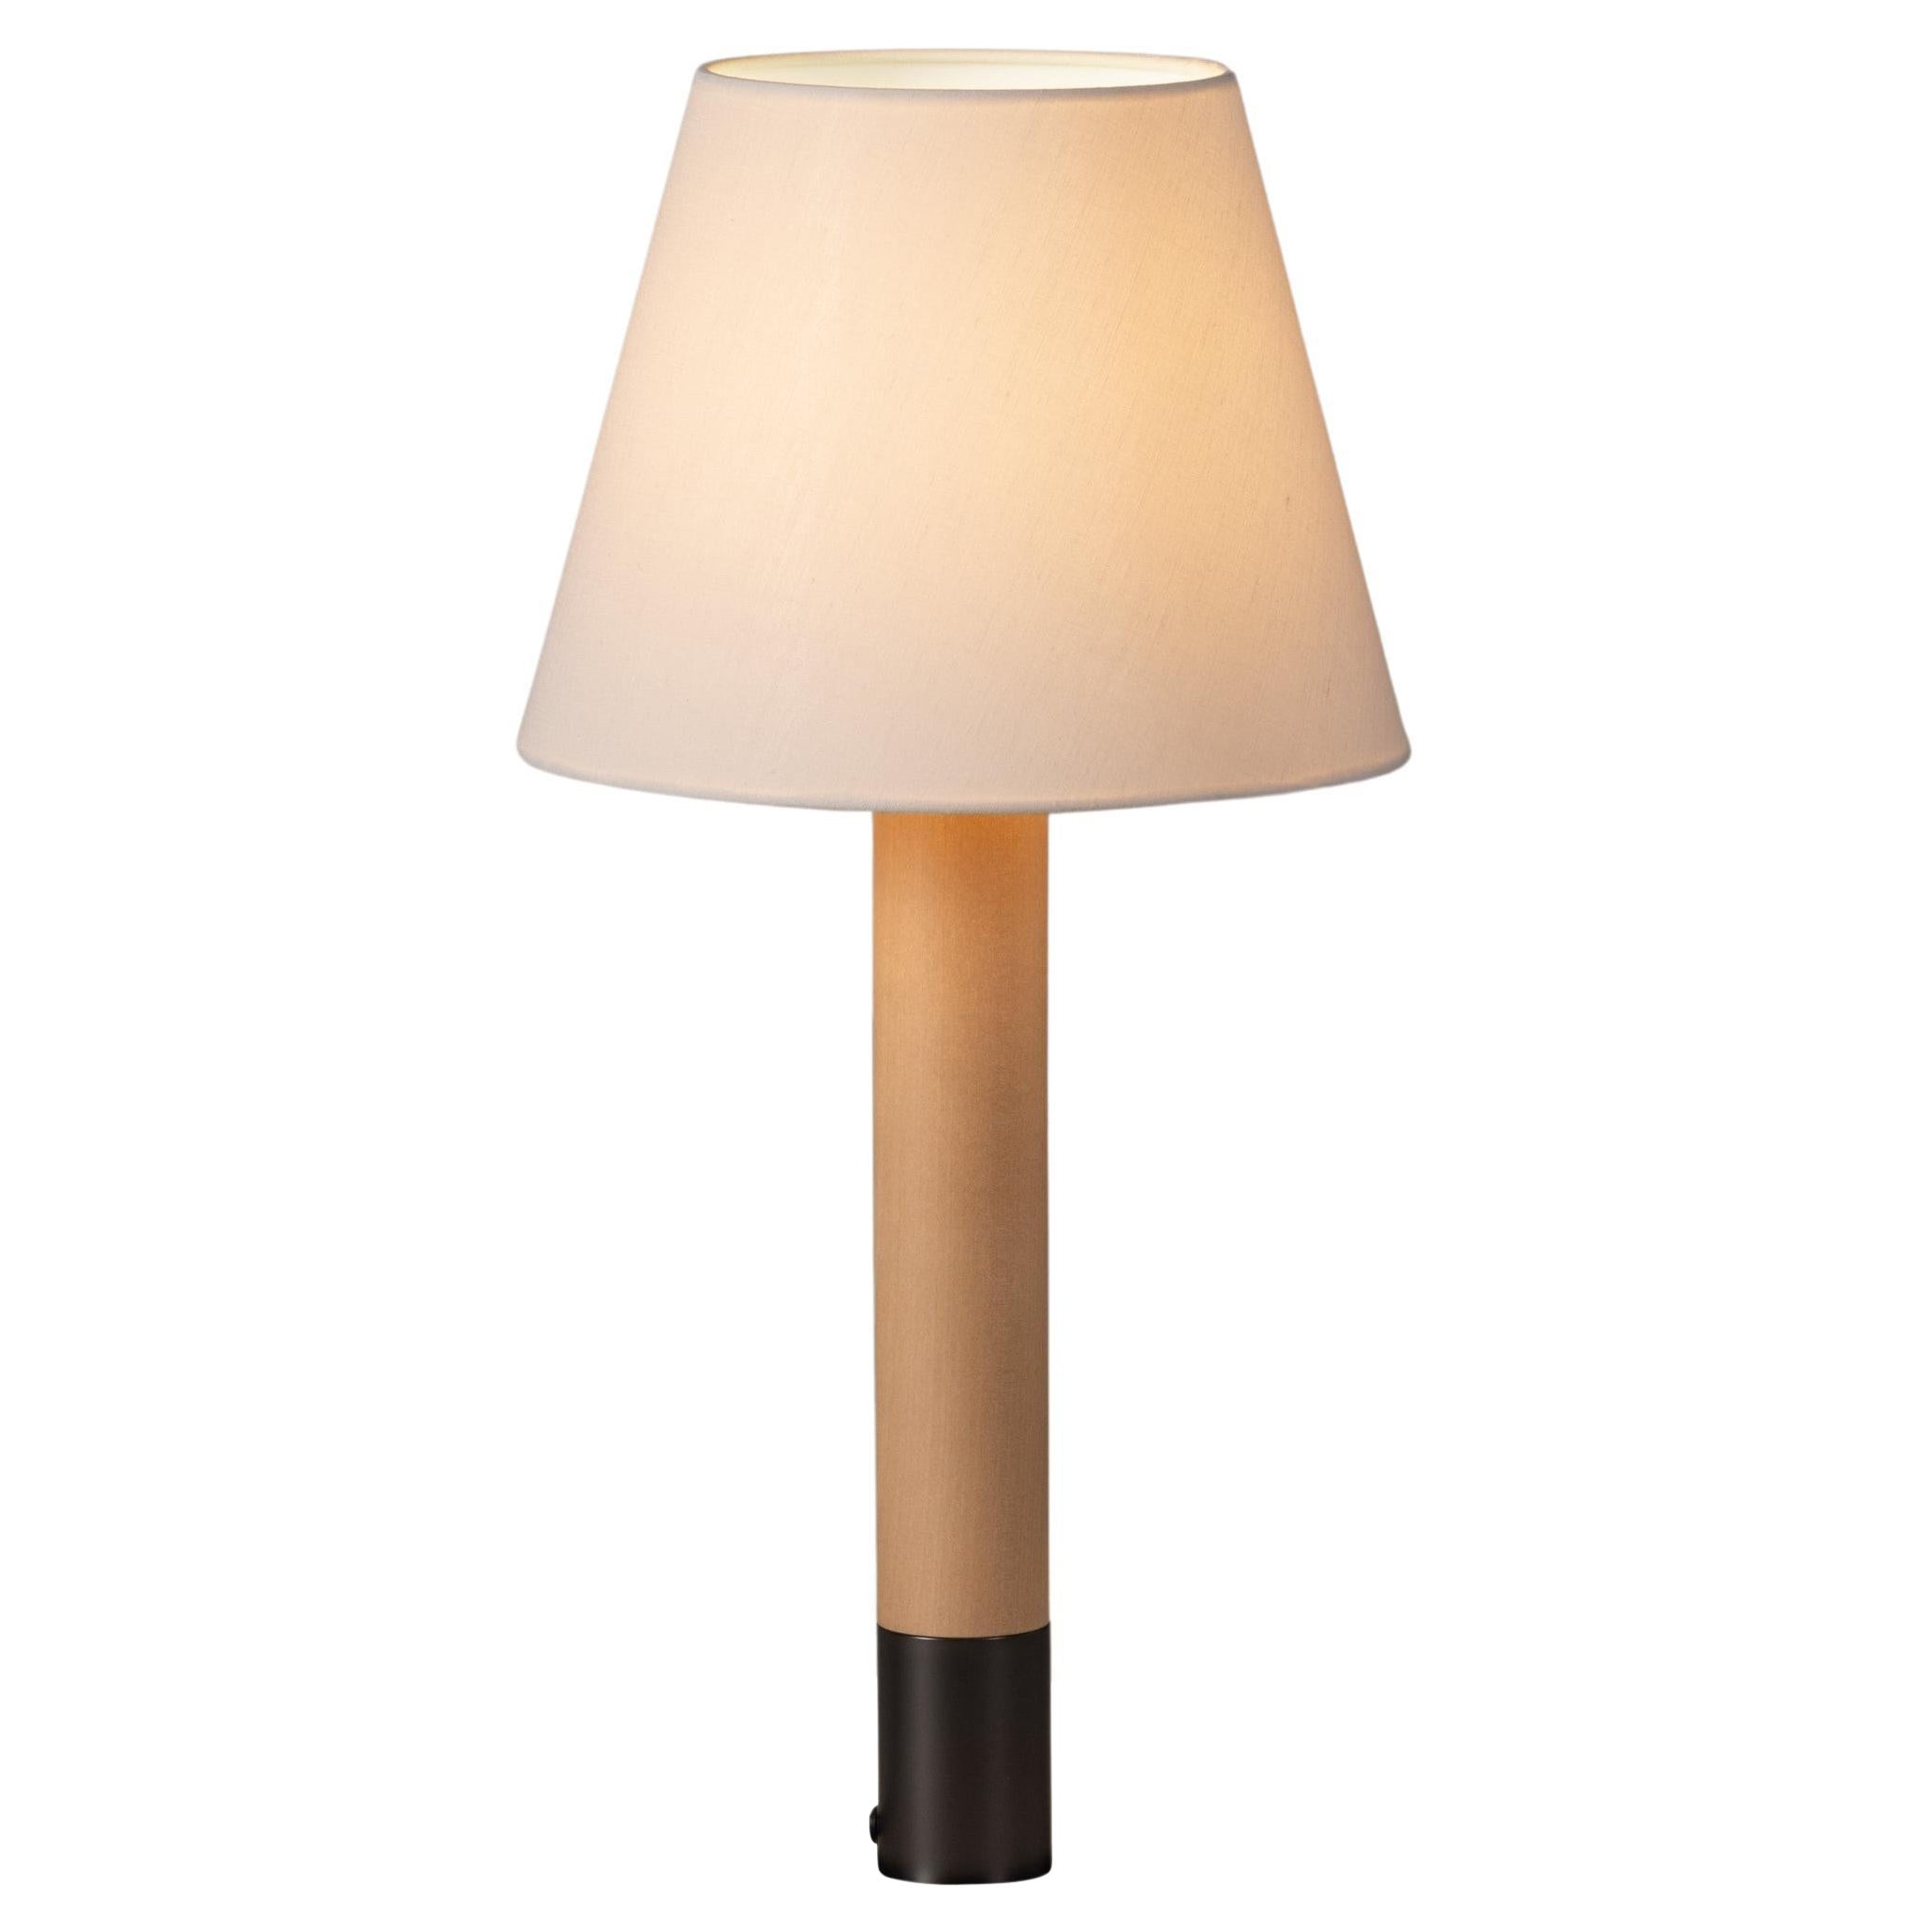 Bronze and White Básica M1 Table Lamp by Santiago Roqueta, Santa & Cole For Sale